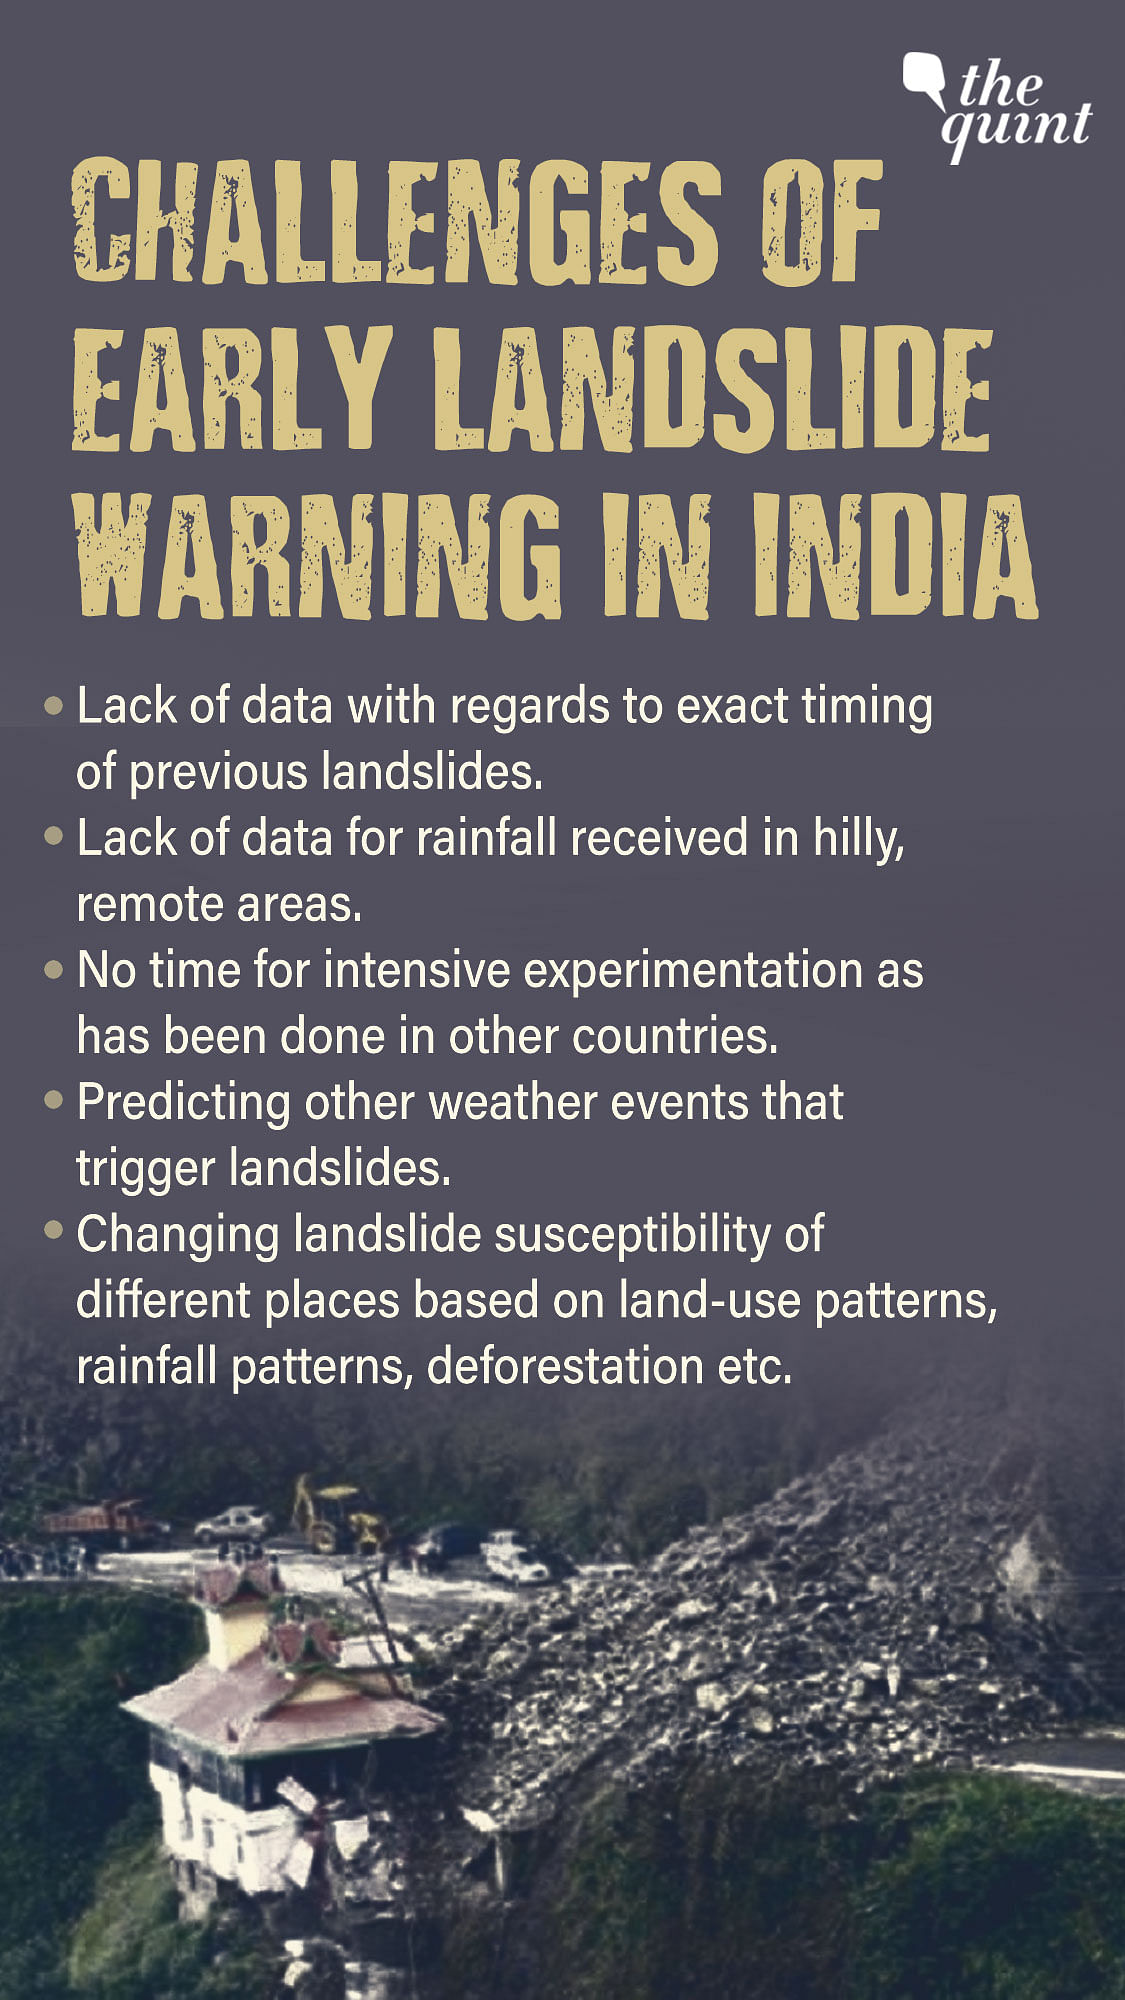 Over 12 percent of the Indian landmass is prone to landslides.